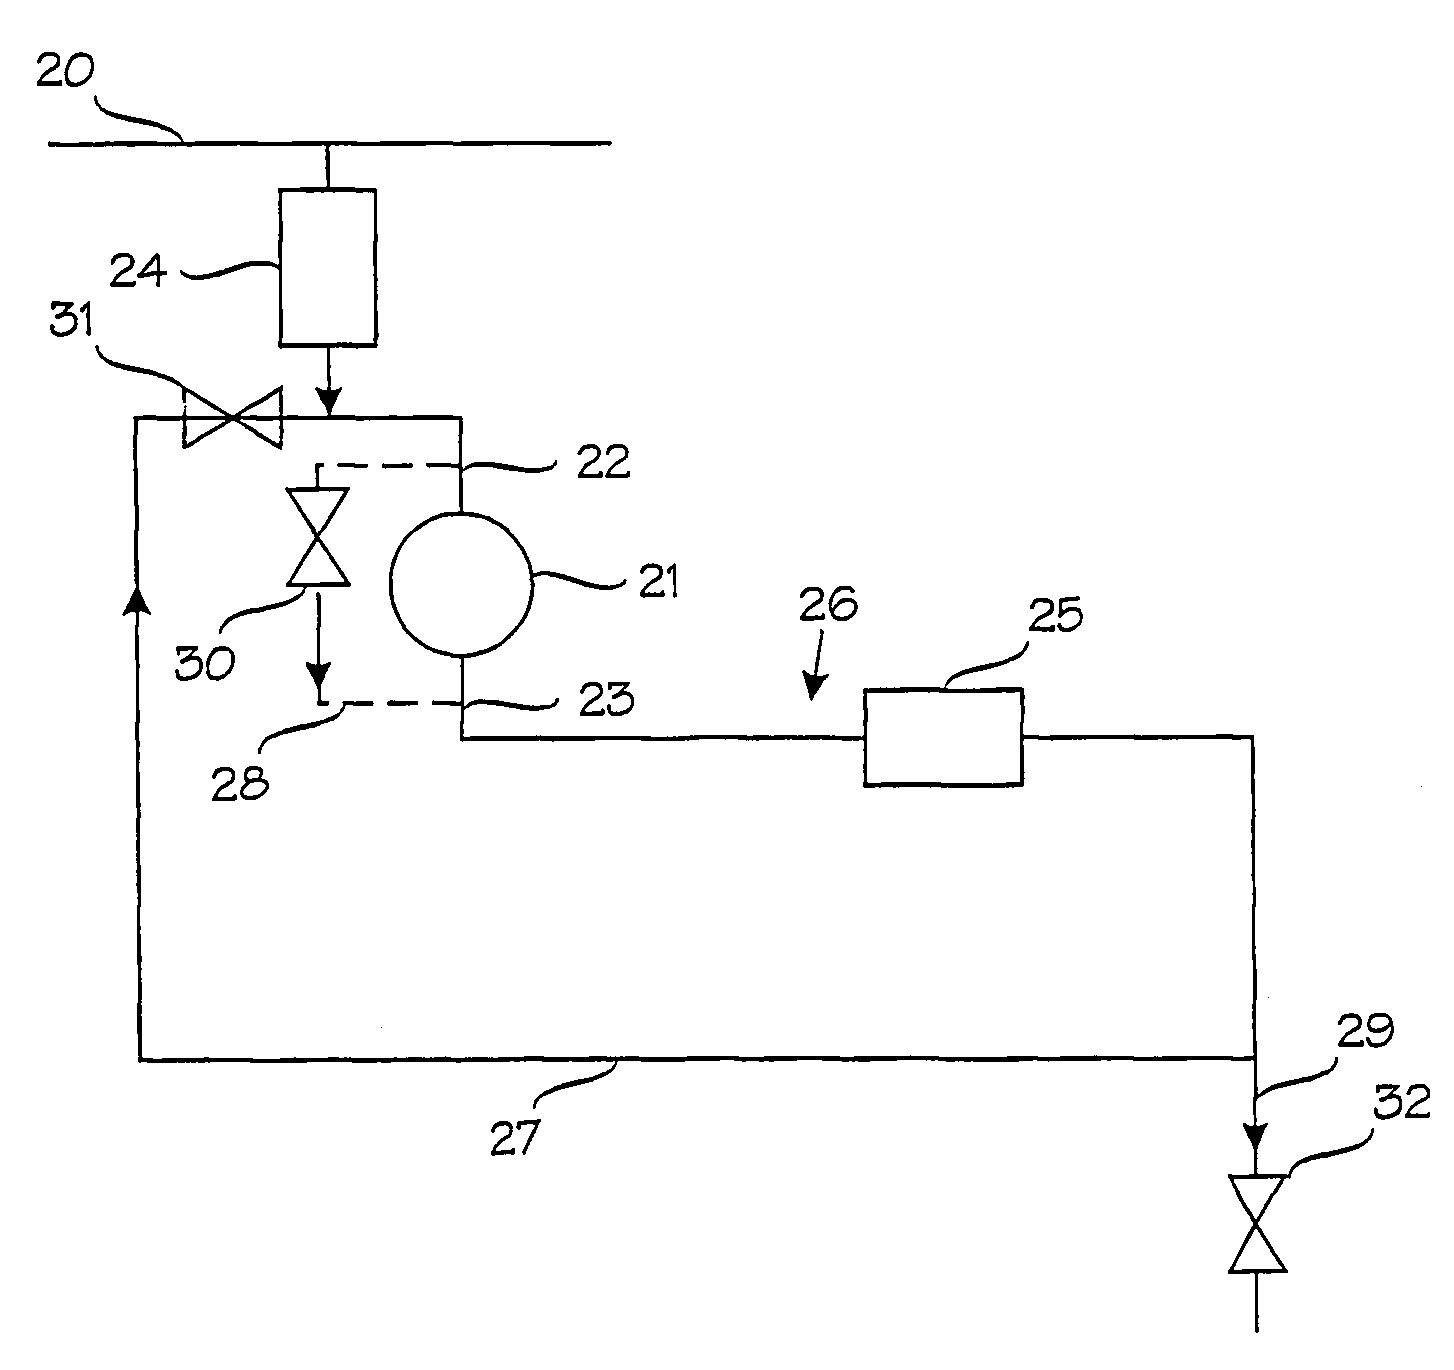 System for producing and distributing compressed air